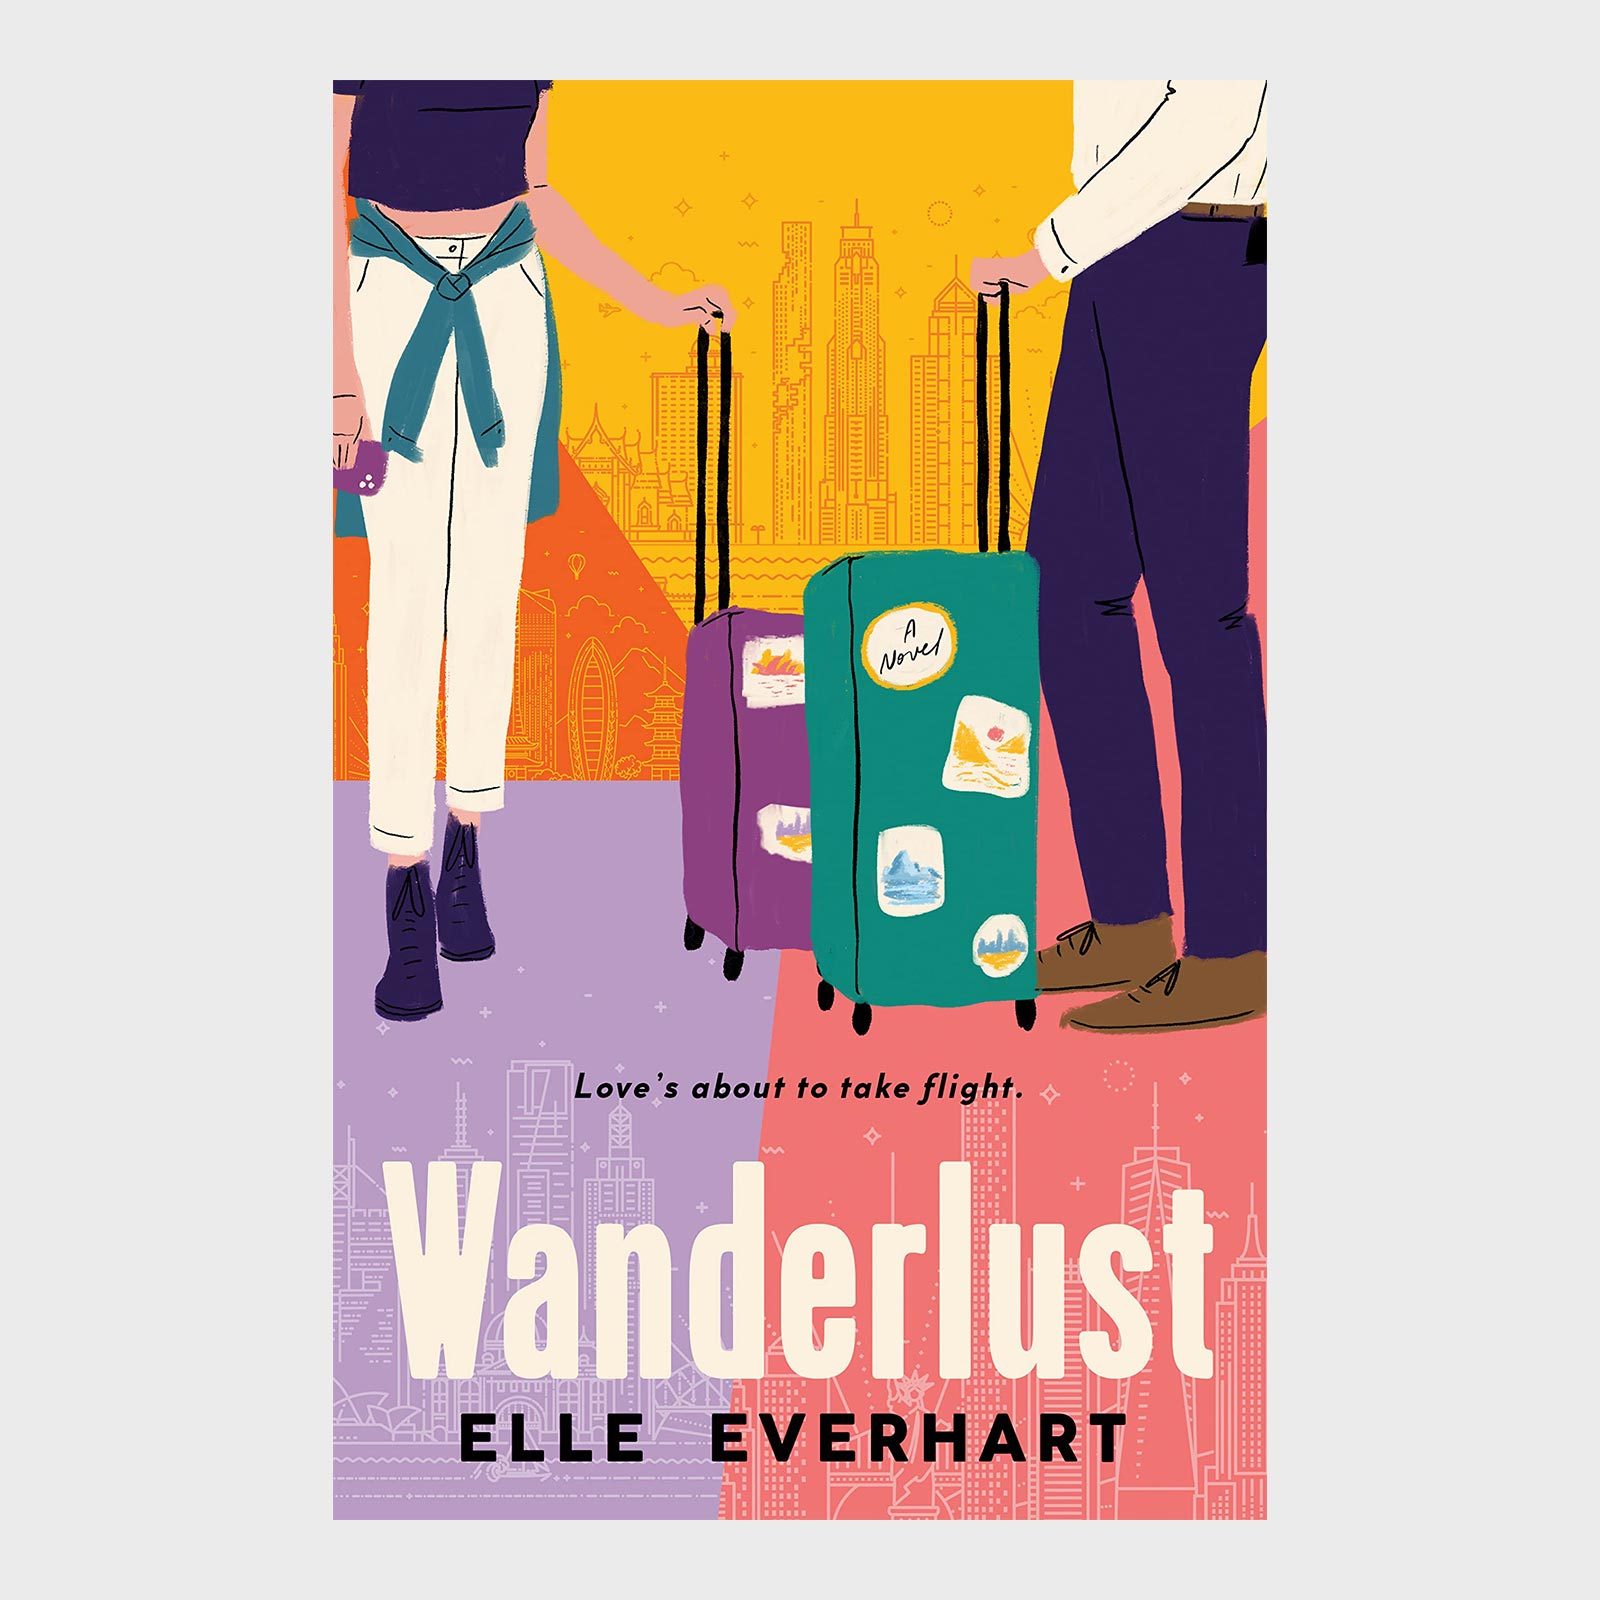 <h3><em>Wanderlust </em>by Elle Everhart</h3> <p><strong>Setting:</strong> All over the world</p> <p>Picture this: You're stuck in the office for the summer, plotting your next move up the corporate ladder. On a whim, you call in to the local radio station when they're running a once-in-a-lifetime travel sweepstake. <em>And you win. </em>The trouble is that you're sent packing with someone else, and he happens to be a guy you met at a bar just once. That's how Dylan and her almost-fling, Jack, travel together through Marrakech, Tokyo, Sydney and more. Elle Everhart's July 2023 debut novel, <a href="https://www.amazon.com/Wanderlust-Elle-Everhart/dp/0593545087/" rel="noopener noreferrer"><em>Wanderlust</em></a>, is a perfect summer read—plenty of sexy <a href="https://www.rd.com/list/best-enemies-to-lovers-books/" rel="noopener noreferrer">enemies-to-lovers</a> tension and enough immersive travel descriptions to feel like you got a whirlwind vacation too.</p> <p class="listicle-page__cta-button-shop"><a class="shop-btn" href="https://www.amazon.com/Wanderlust-Elle-Everhart/dp/0593545087/">Shop Now</a></p>